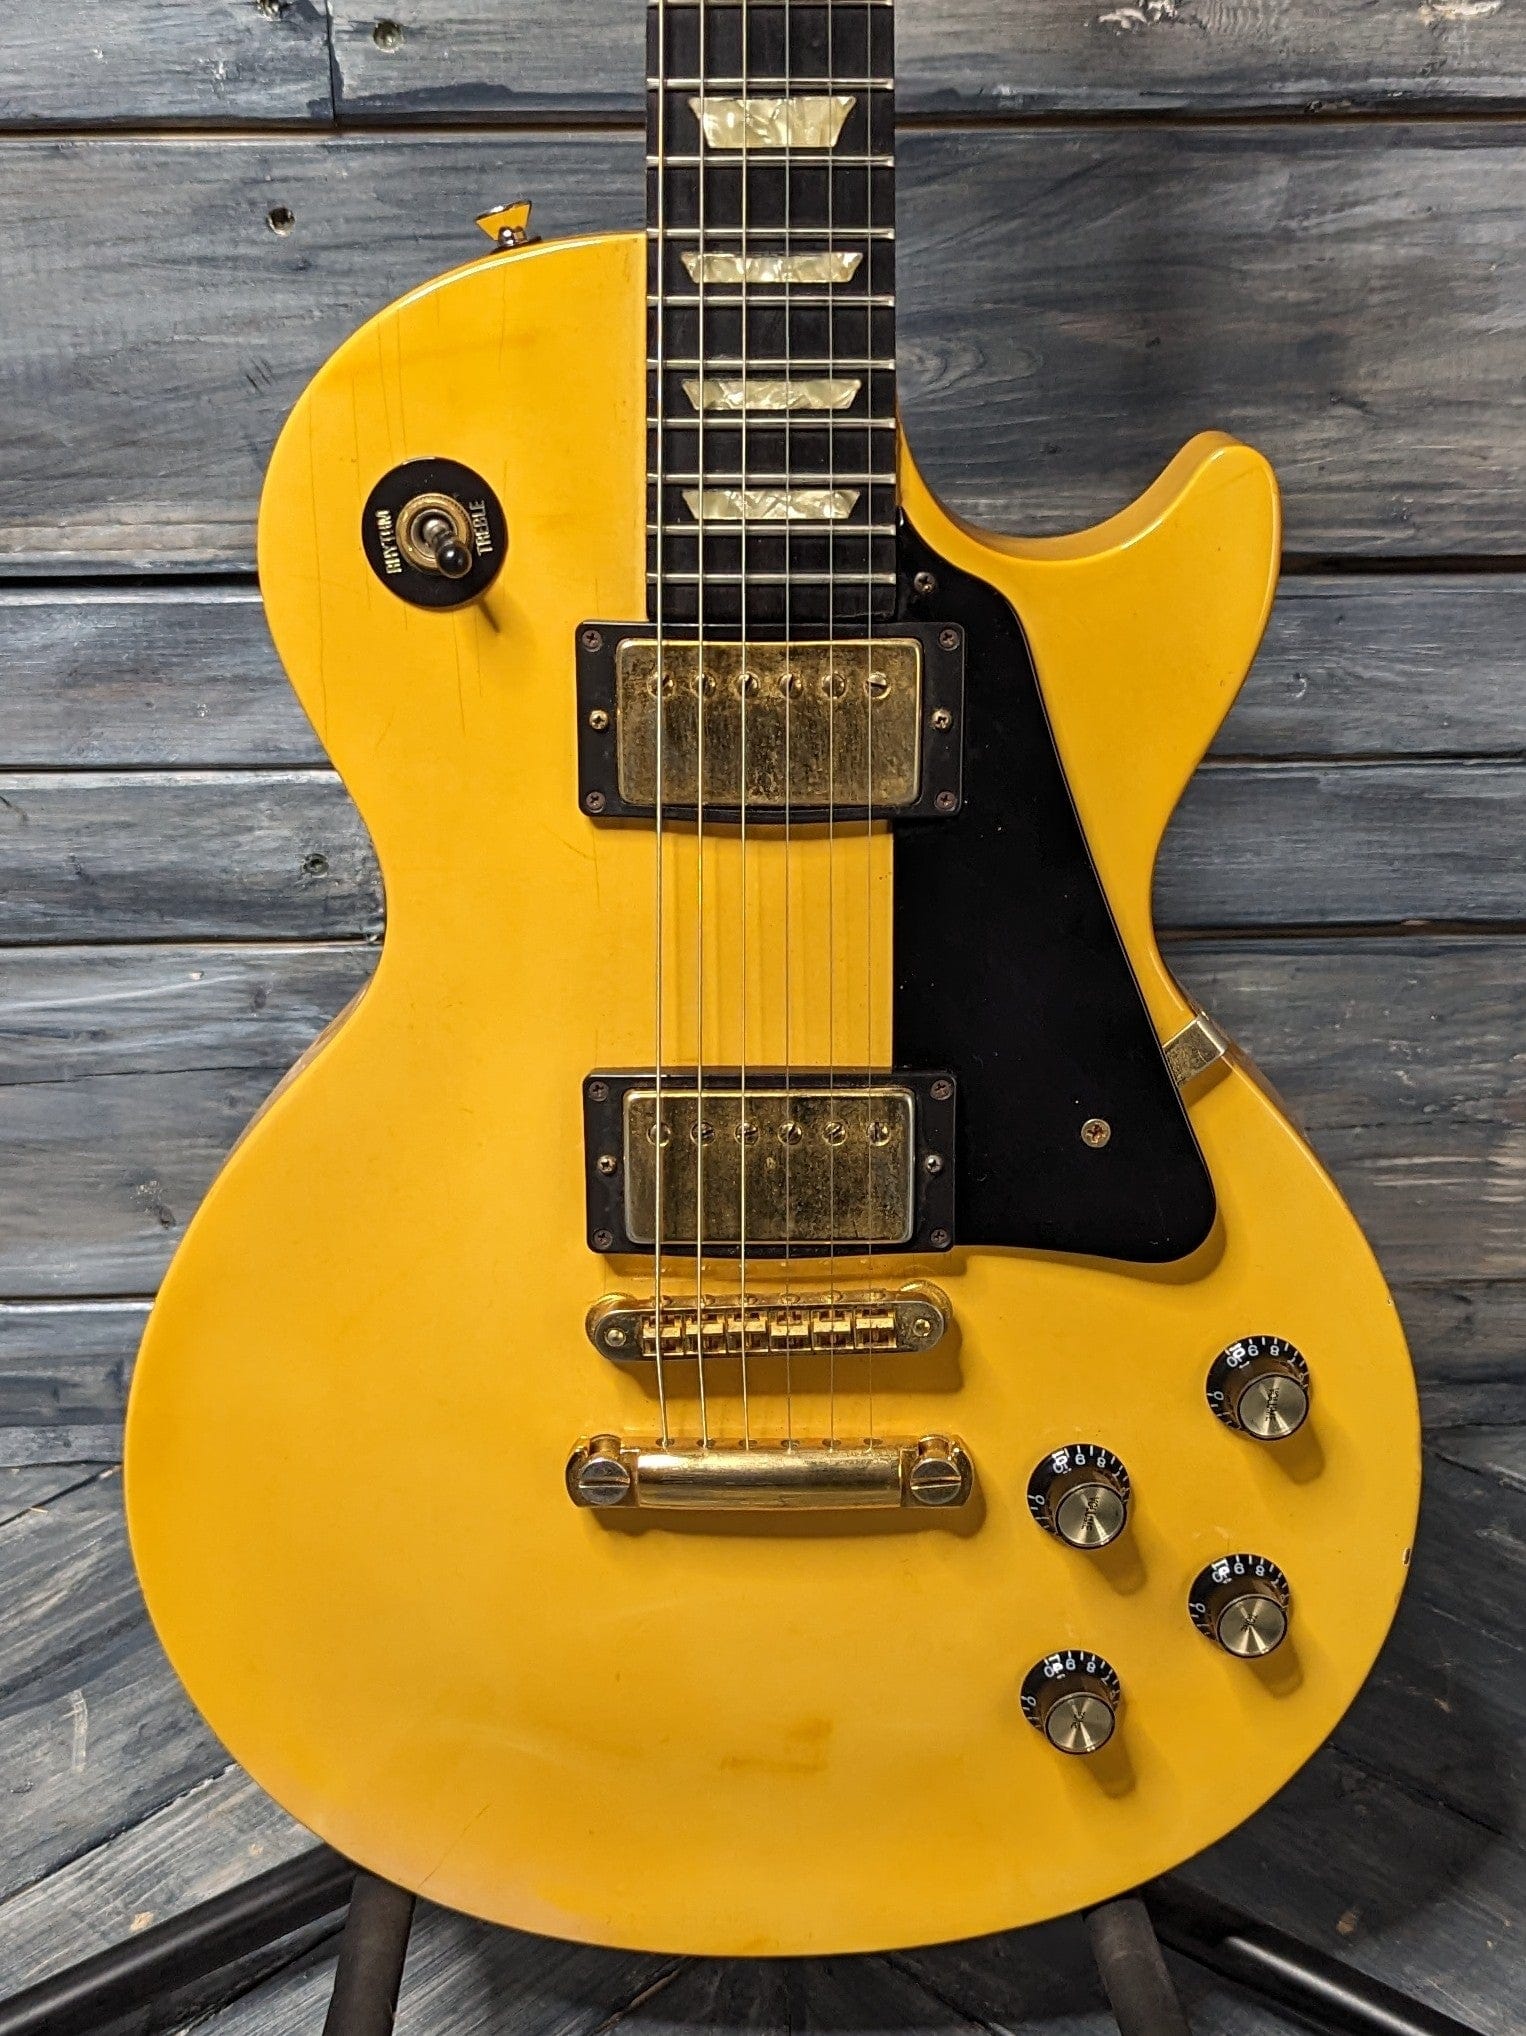 Used Gibson Les Paul Studio close up of the body